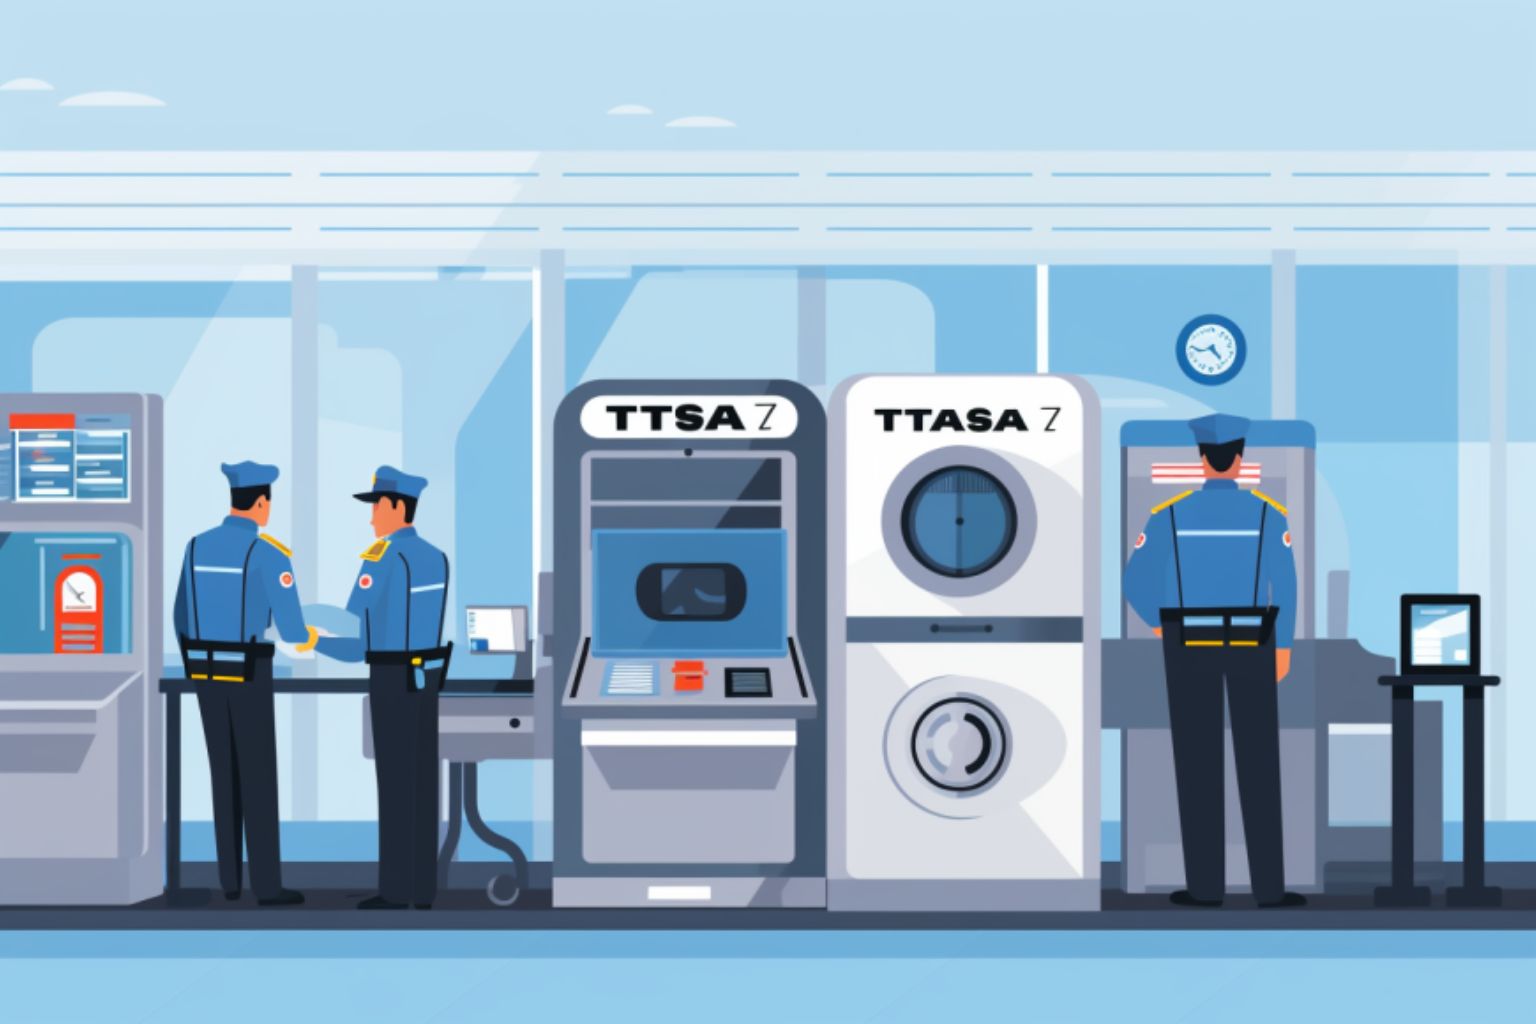 If you thought the TSA's reputation as America's worst federal agency couldn't get any worse, I wouldn't blame you.